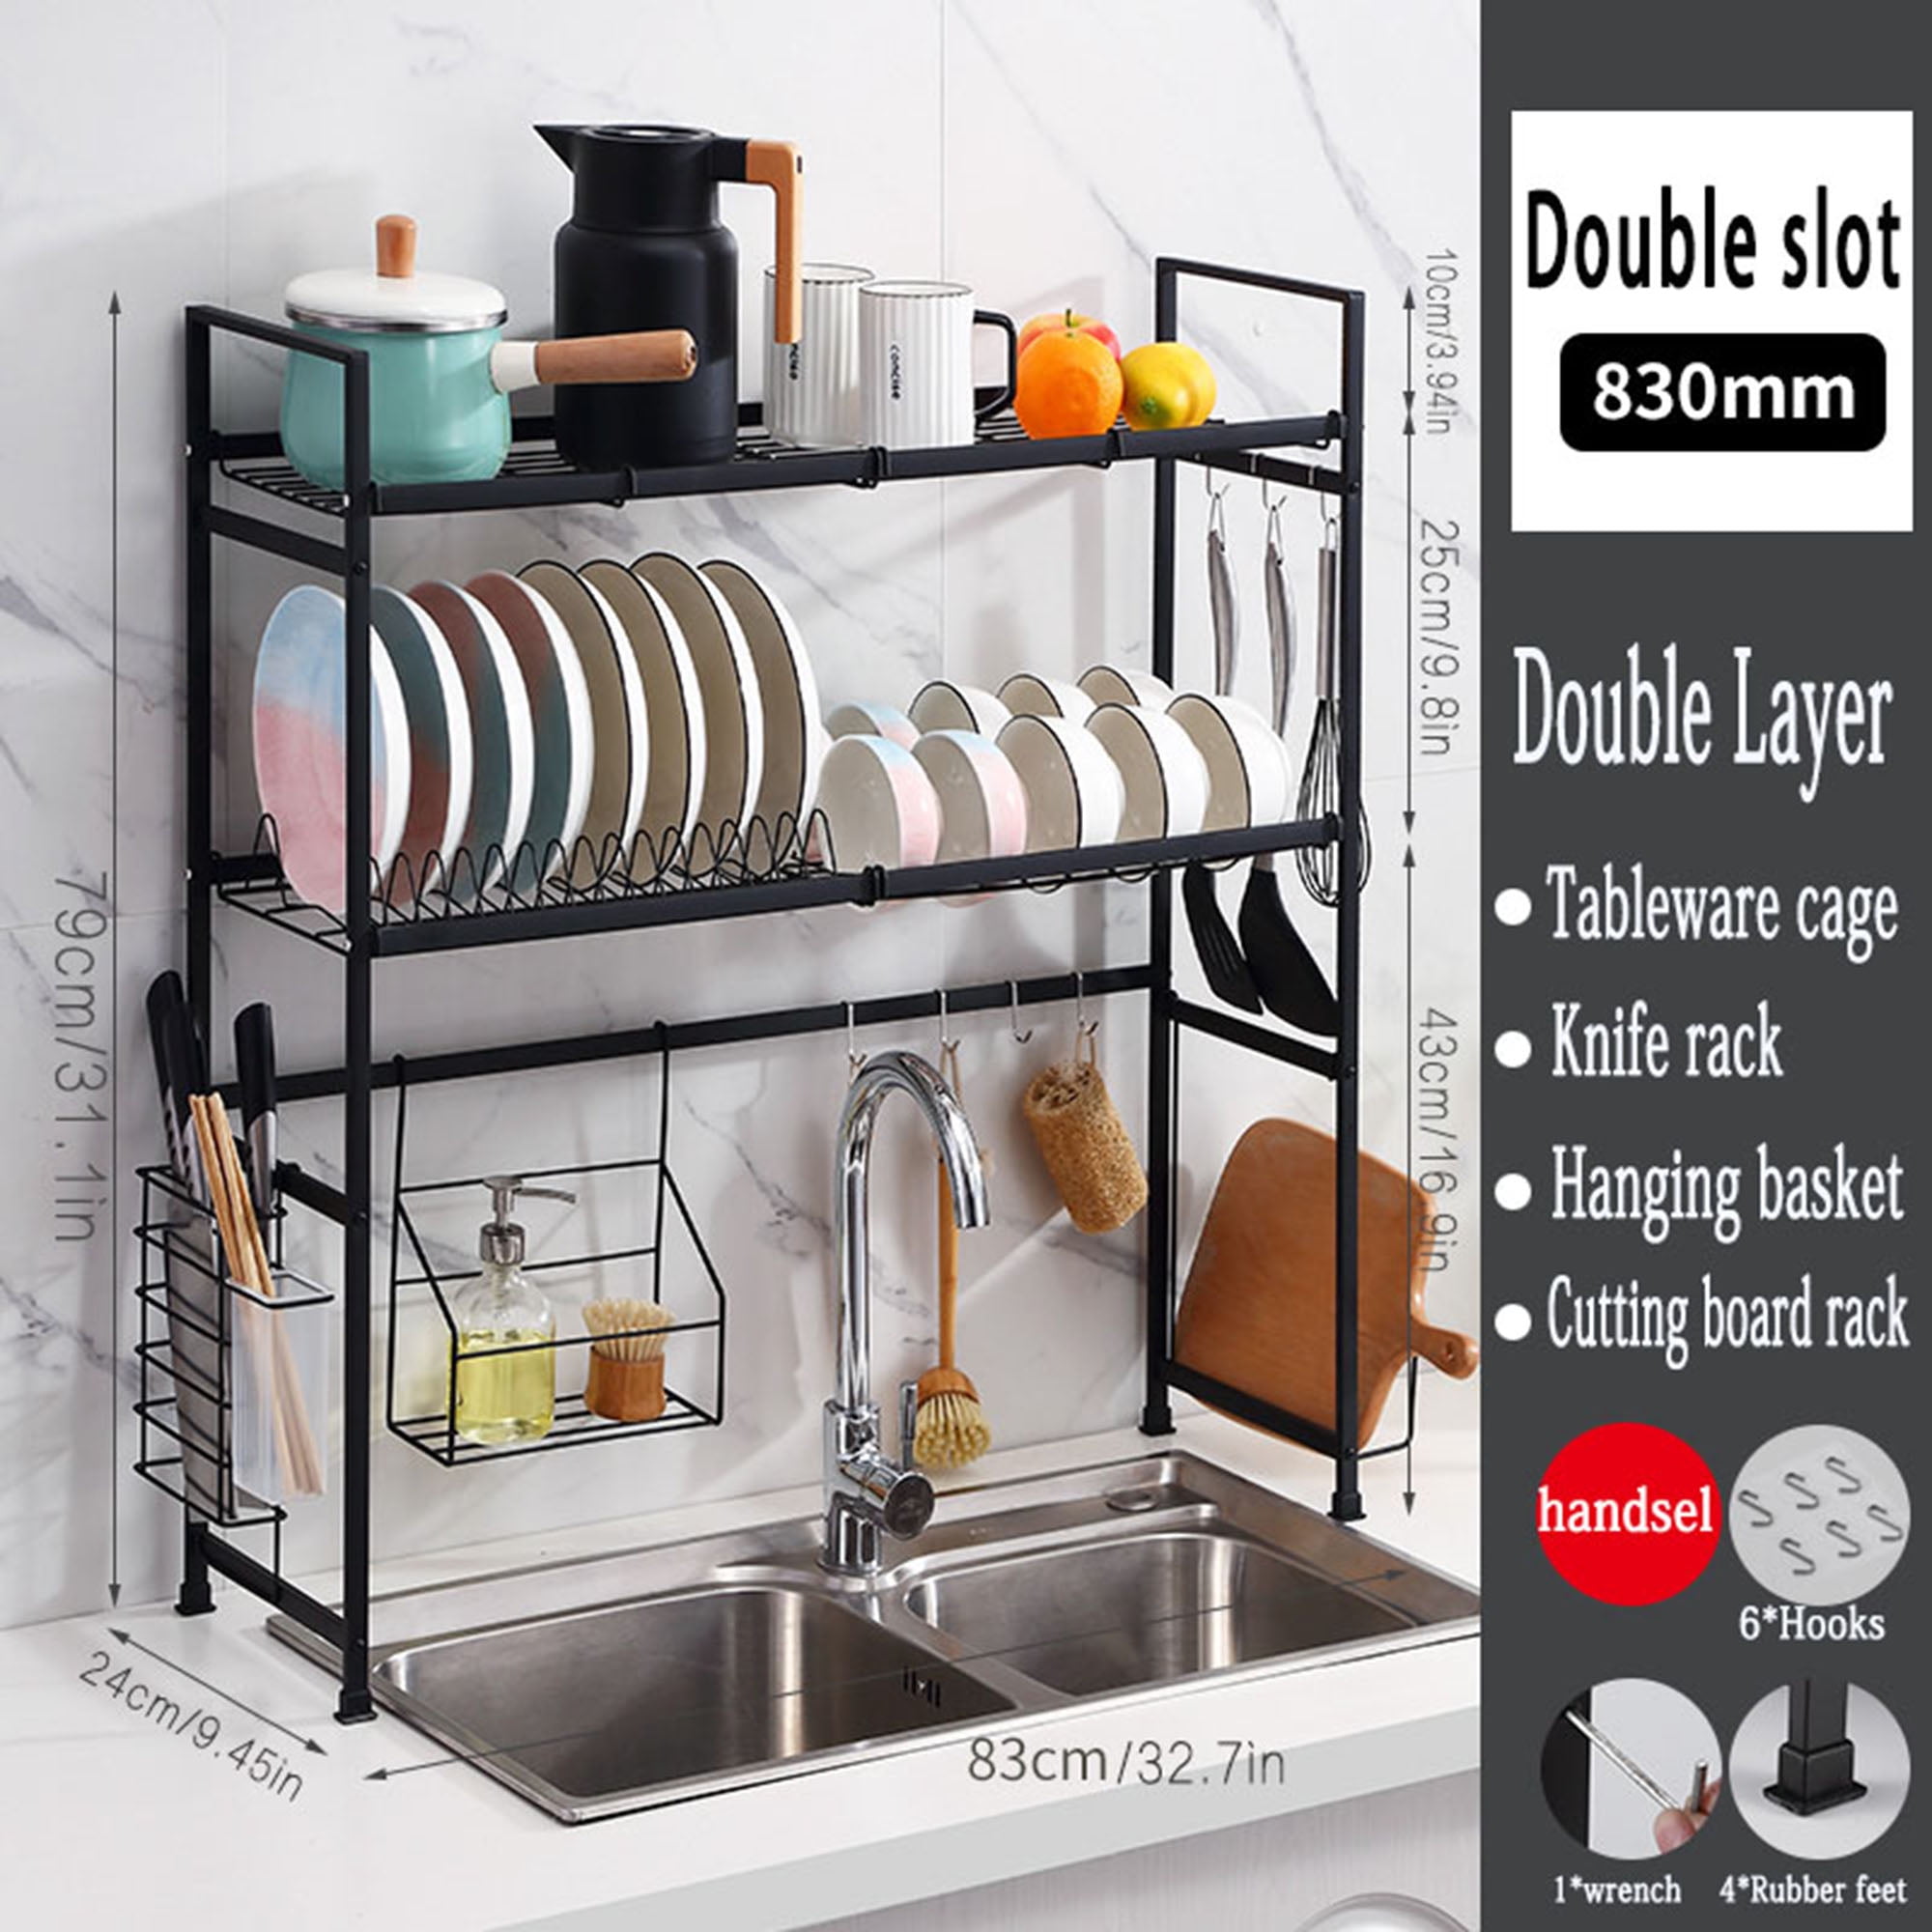 DUANFEE Dish Drying Rack - 2 Tier Small Dish Racks for Kitchen Counter,  Dish Drainer with Utensil Holder, Glass Holder and Drainboard,  Multifunctional